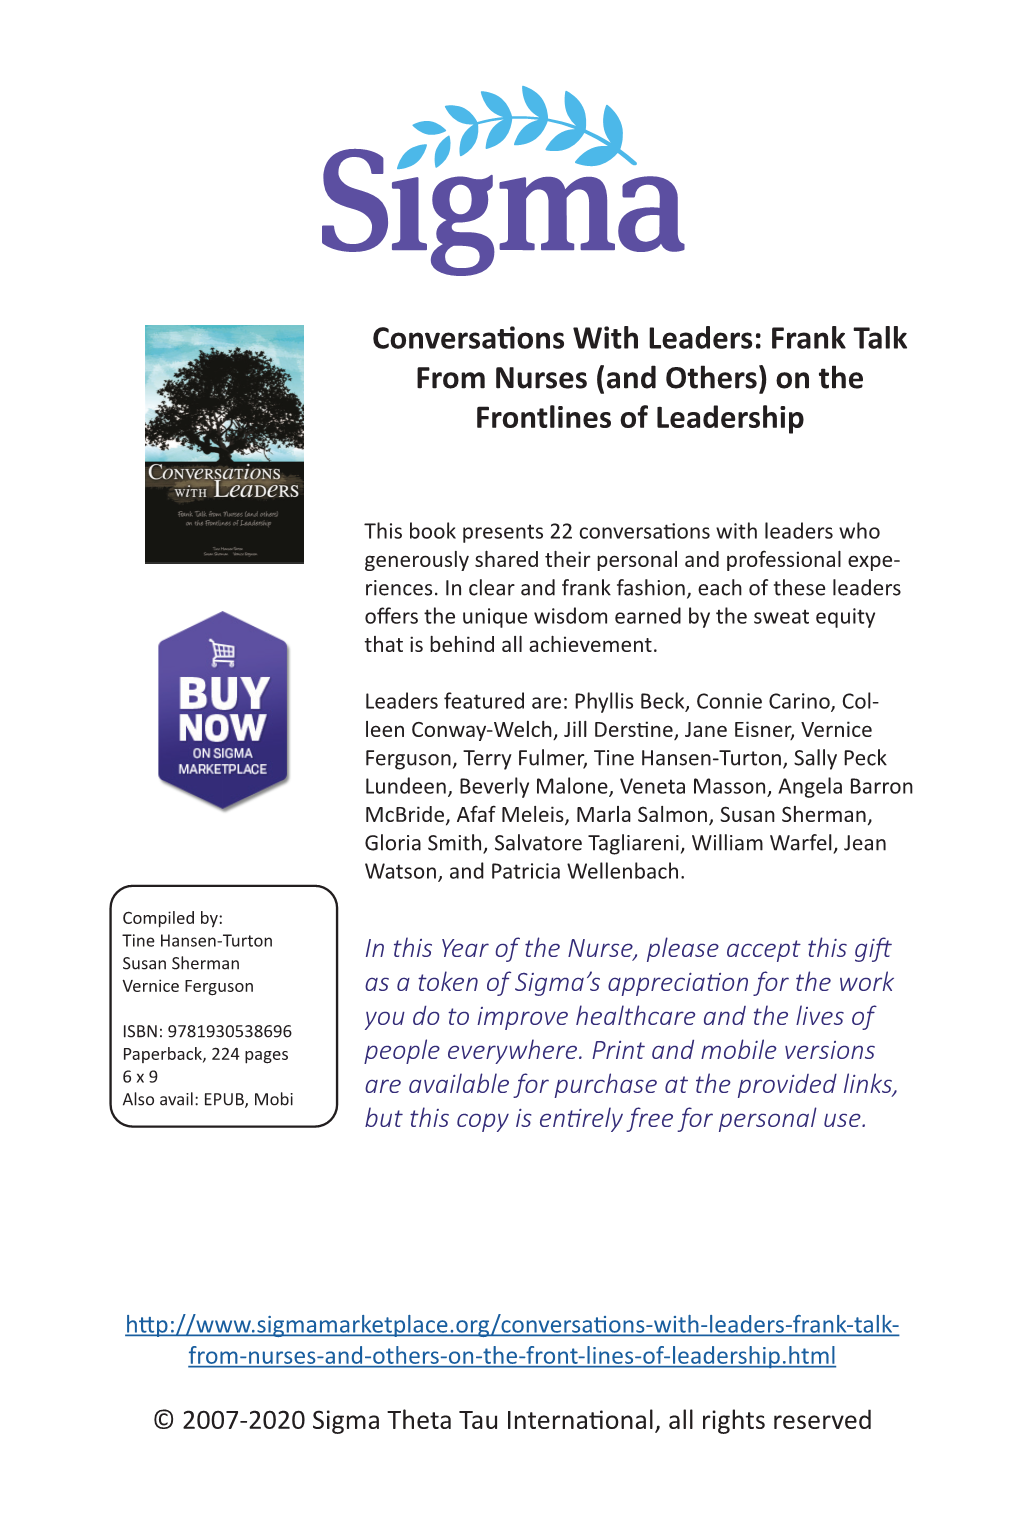 Conversations with Leaders: Frank Talk from Nurses (And Others) on the Frontlines of Leadership